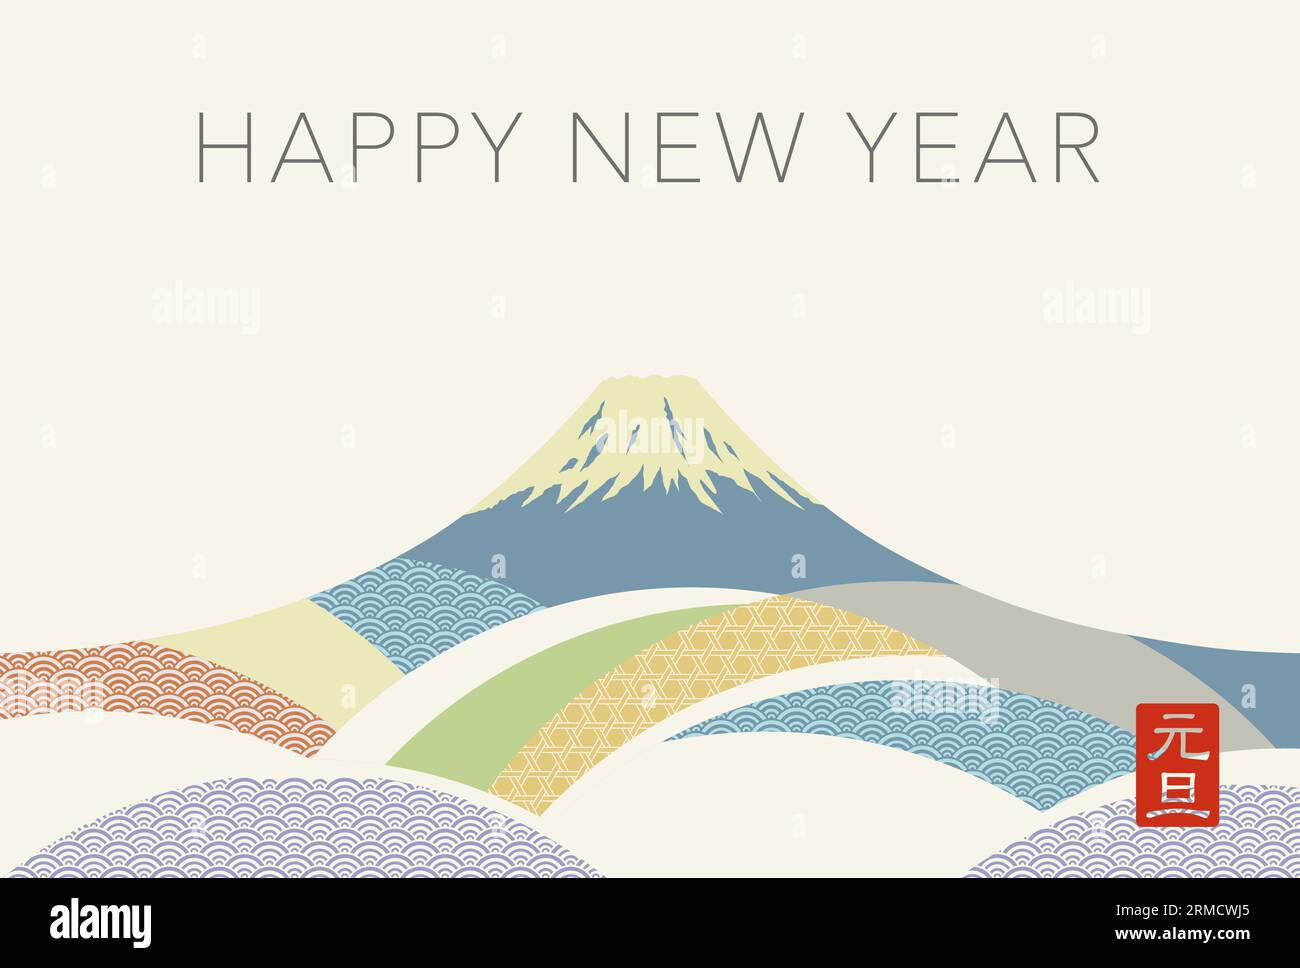 New Year’s Vector Template With Red Mt. Fuji Decorated With Vintage Japanese Patterns. Stock Vector